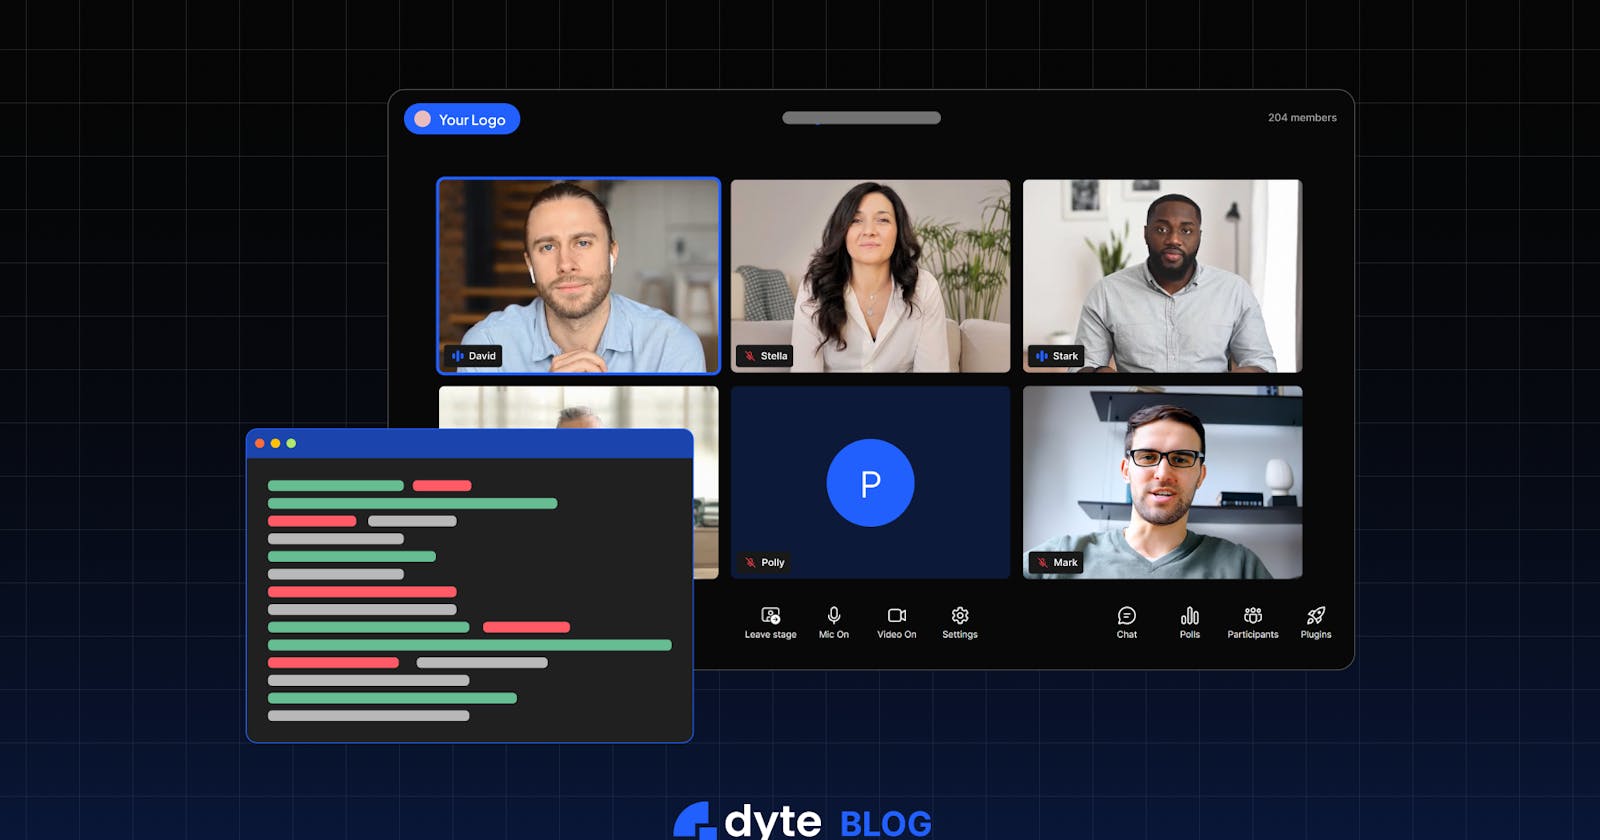 Building a Video Calling App Using WPF & Dyte